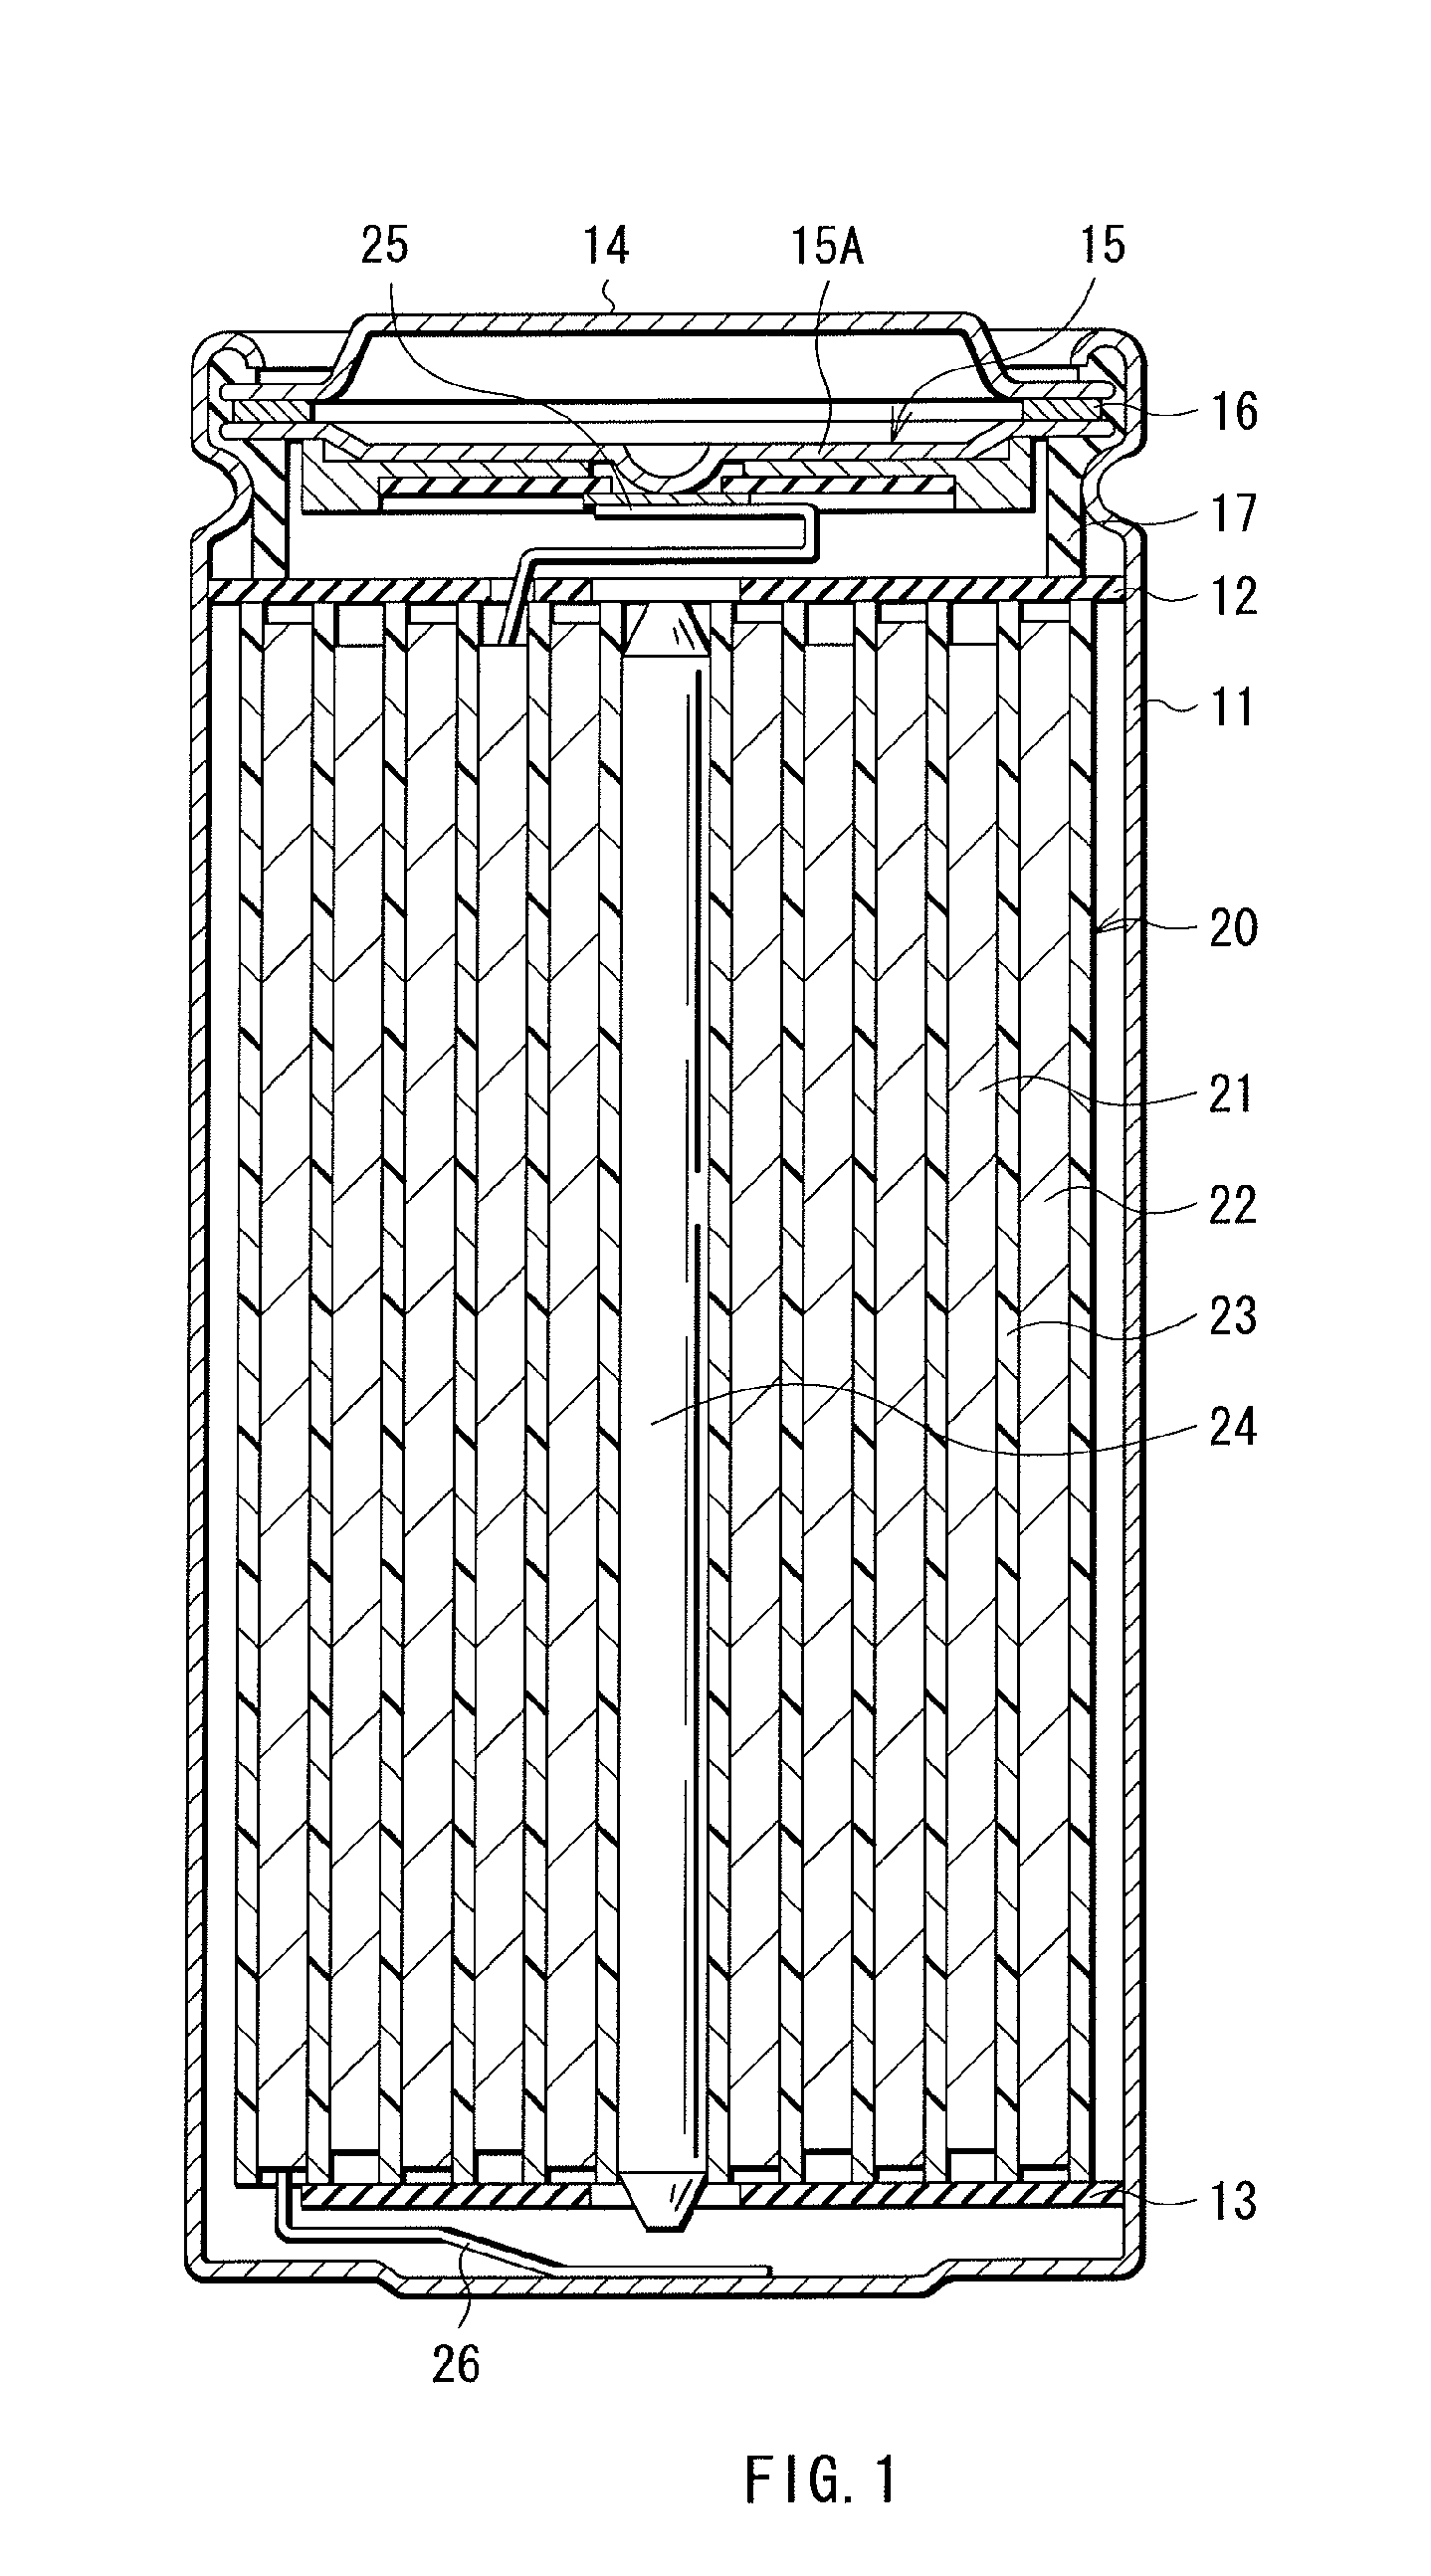 Secondary battery and electronic device